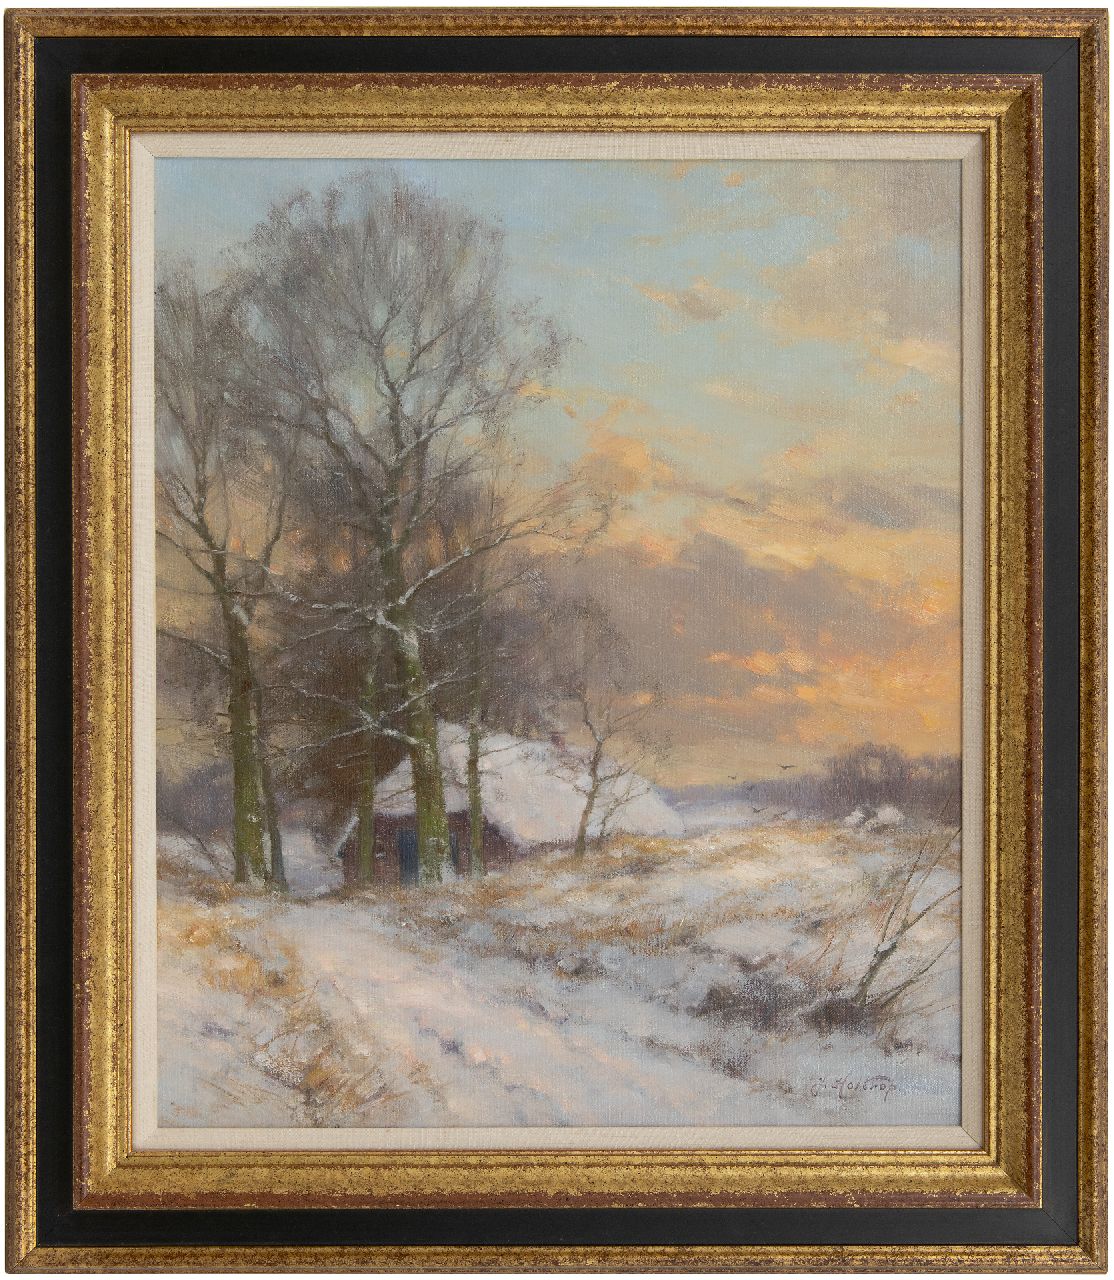 Holtrup J.  | Jan Holtrup | Paintings offered for sale | Farmhouse in a snowy landscape in the Achterhoek, oil on canvas 60.3 x 49.8 cm, signed l.r.